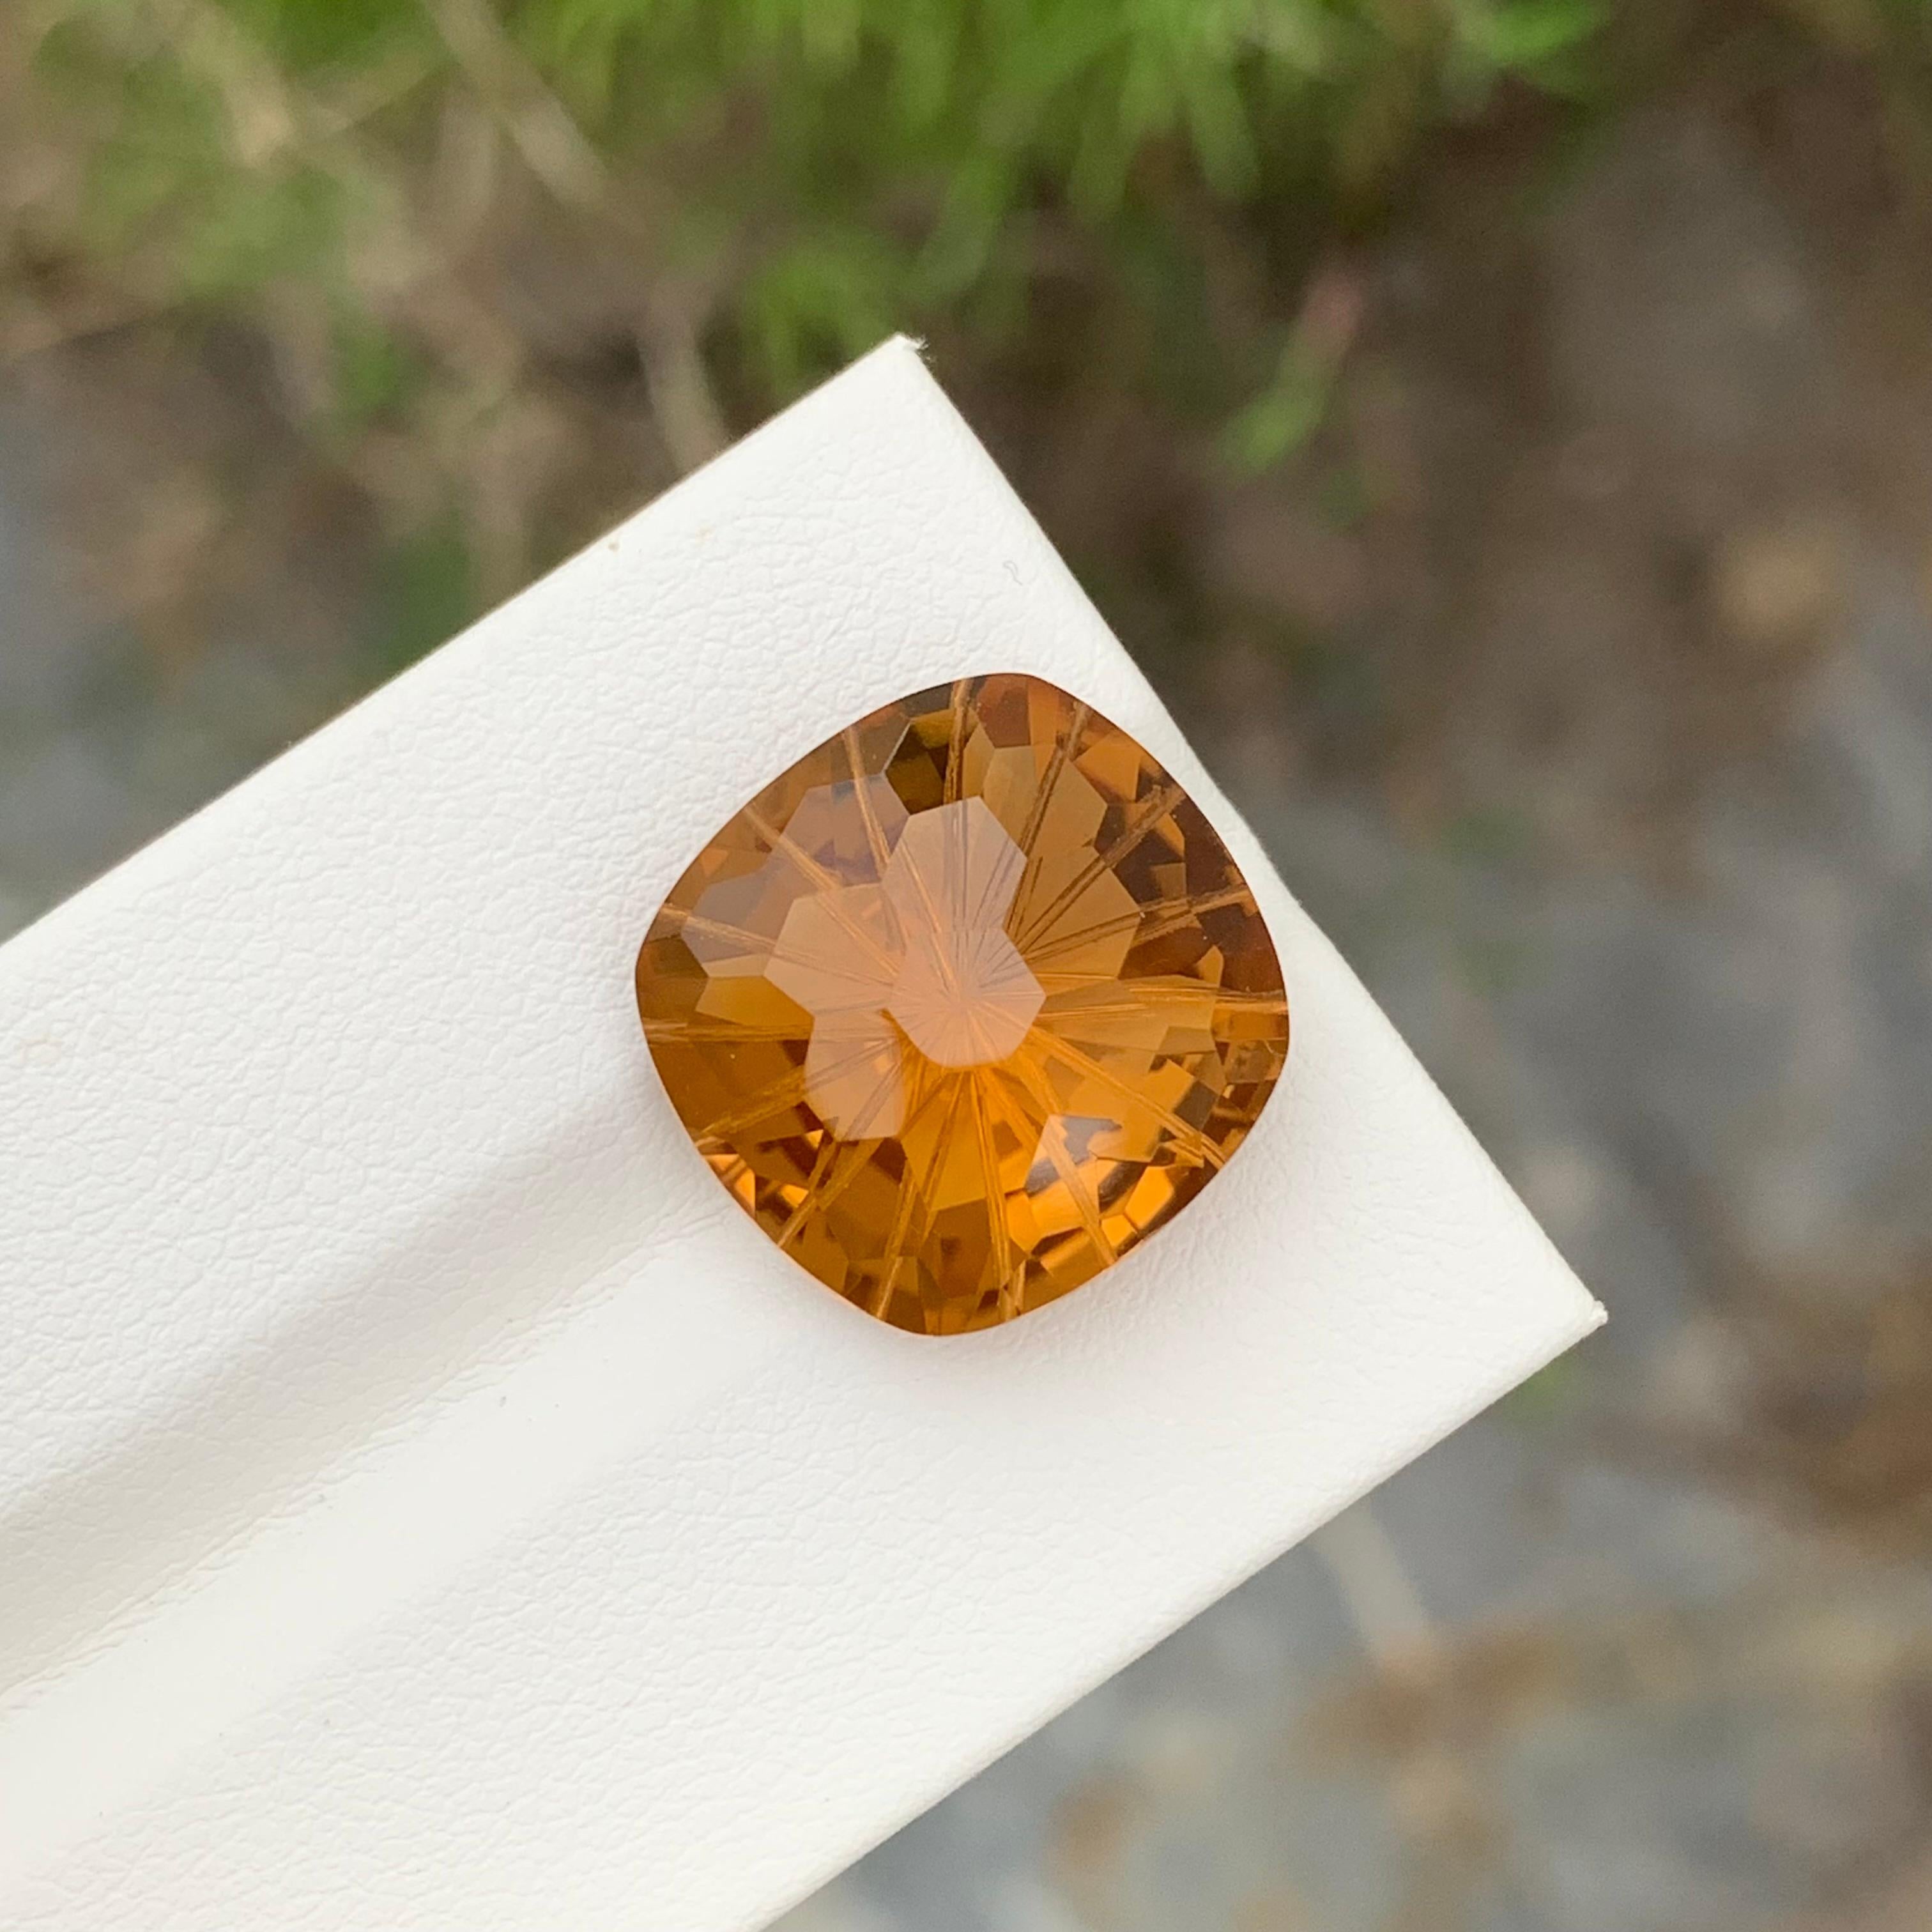 Loose Citrine
Weight: 14.75 Carats
Dimension: 16.4 x 16 x 10 Mm
Origin: Brazil
Colour: Yellow
Treatment: Non
Certficate: On Demand
Shape: Cushion 


Citrine, a radiant and versatile gemstone, enchants with its warm, golden hues and remarkable